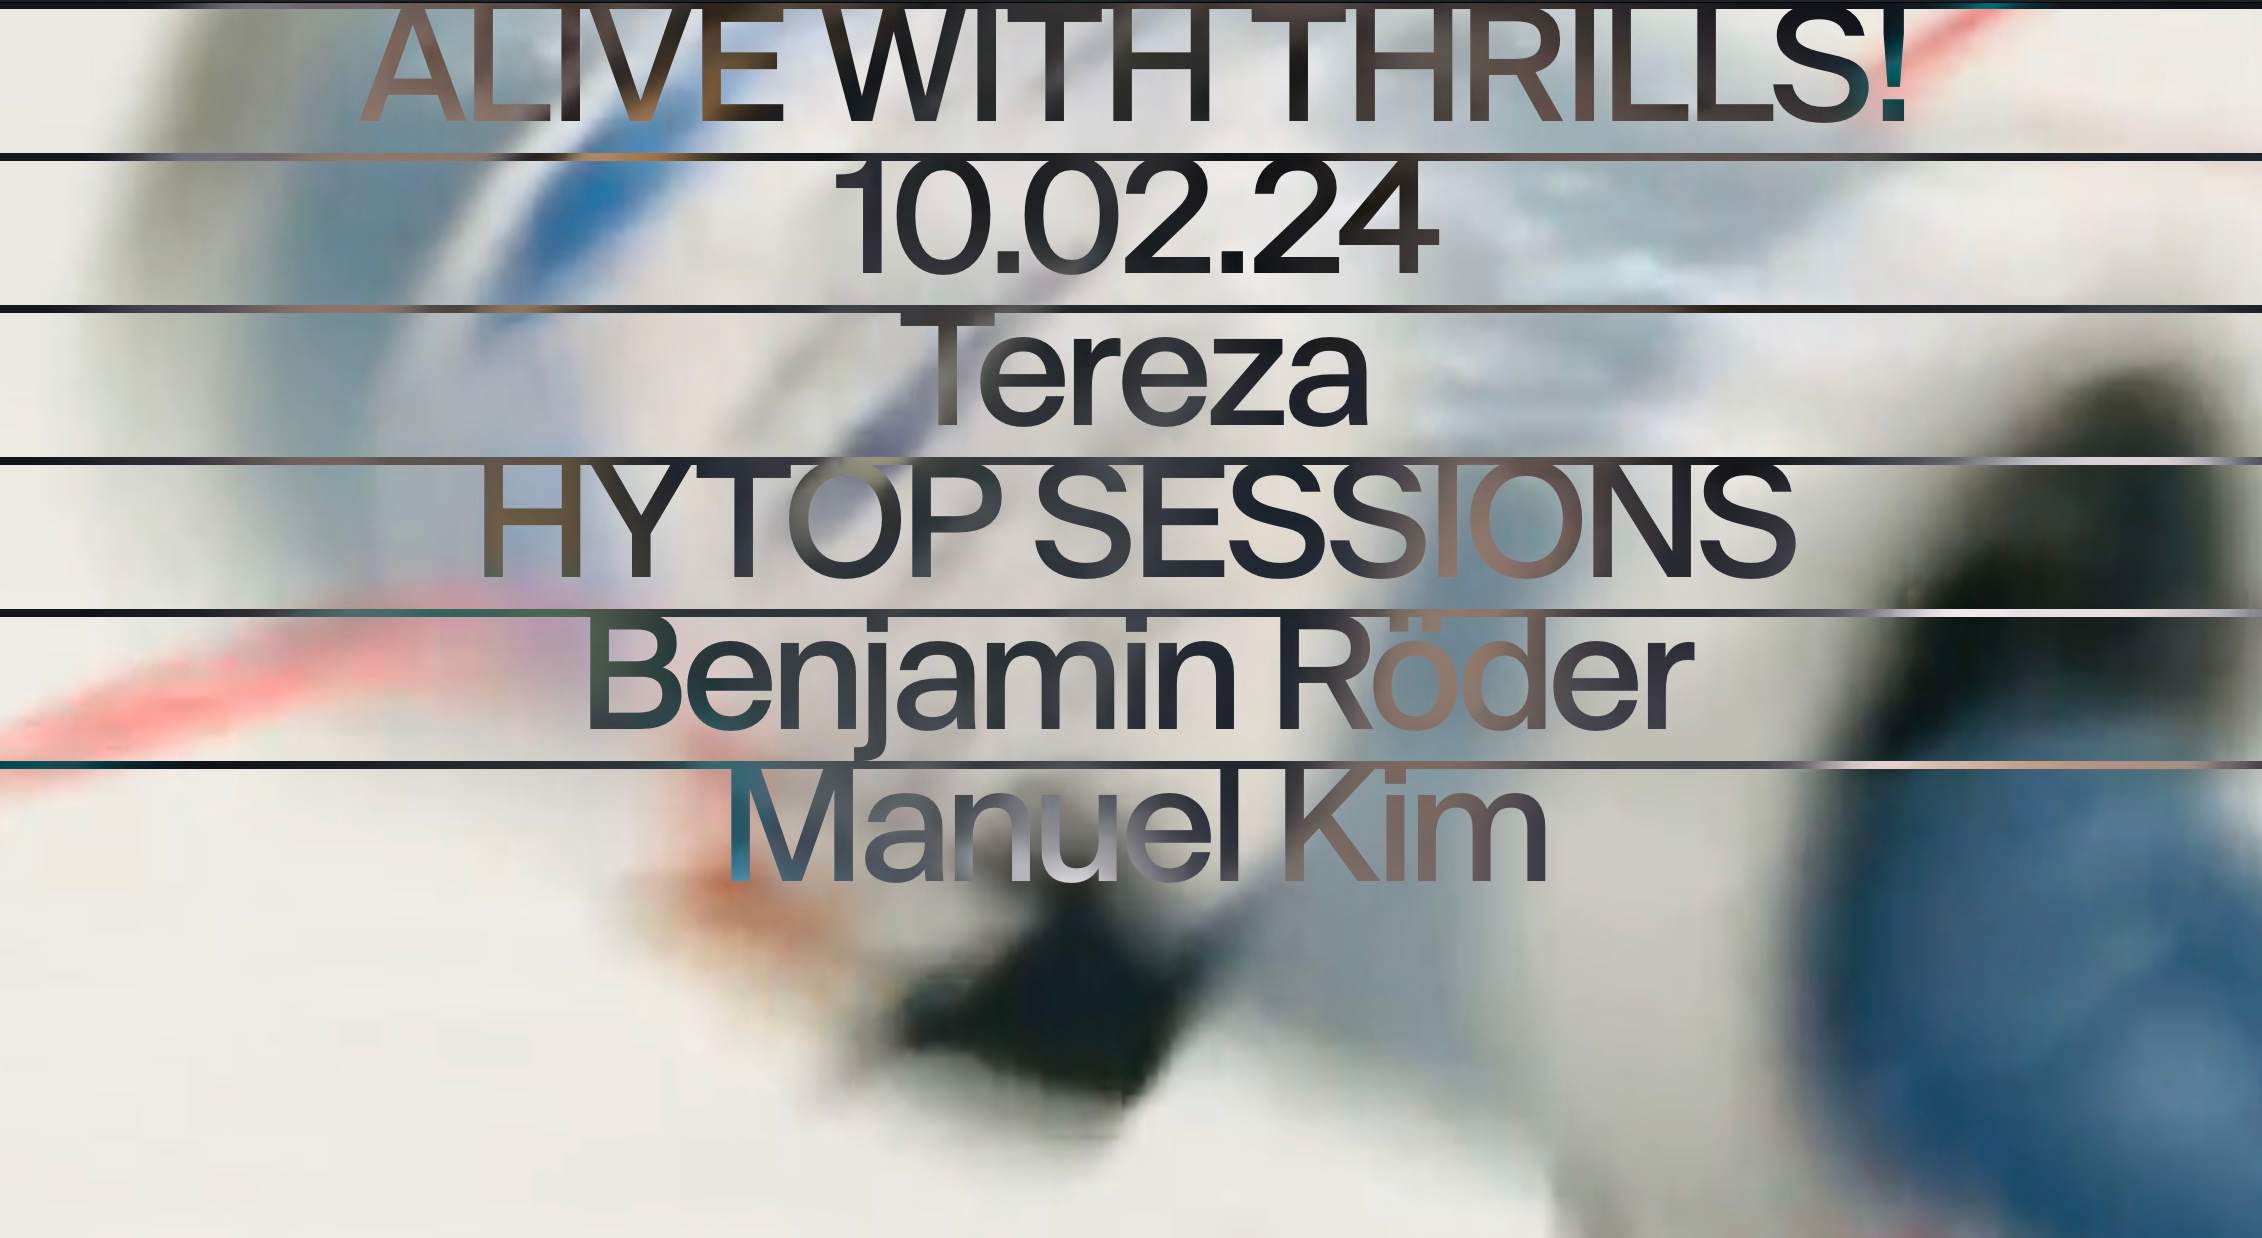 Alive with thrills with Tereza b/w HYTOP - フライヤー表